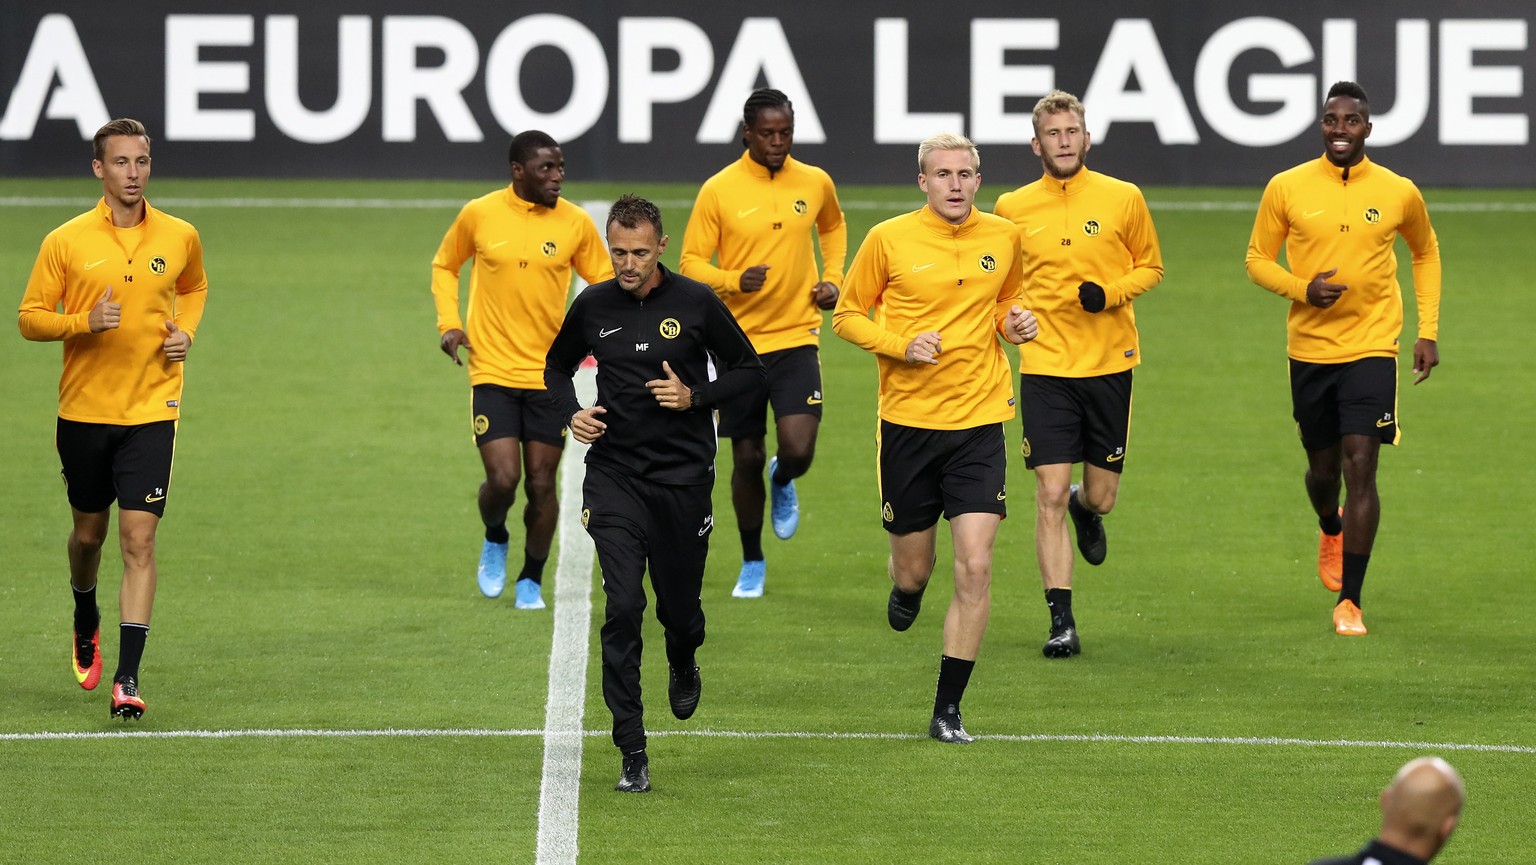 epa07851670 Young Boys players in action during a training session at Dragao stadium, Porto, Portugal, 18 September 2019. Young Boys will face FC Porto in their UEFA Europa League soccer match on 19 S ...